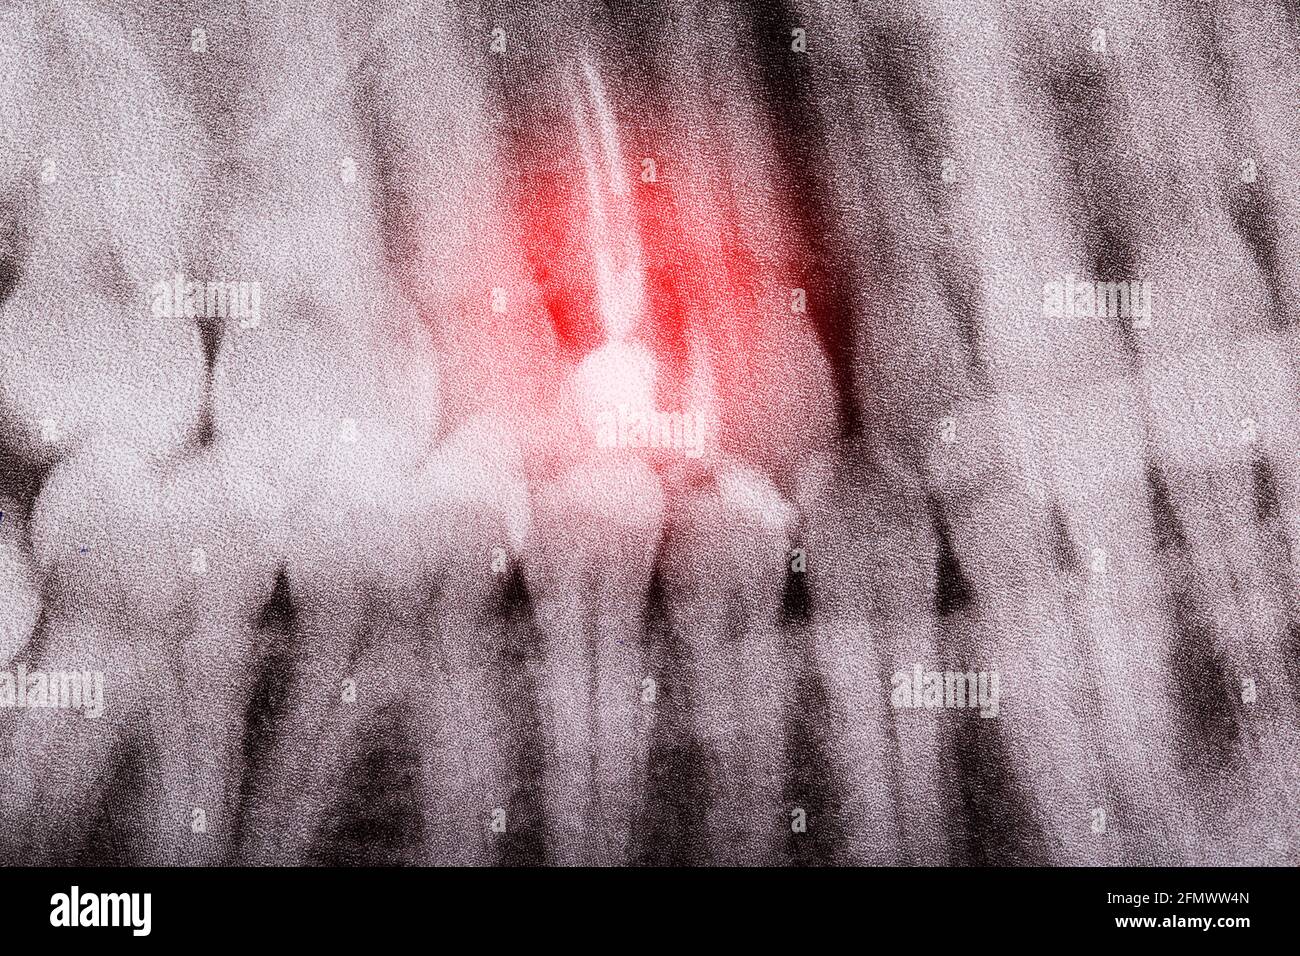 Tooth pulpitis on a dental x-ray, macro. Inflammation of the root canals and nerves. Chronic periodontitis Stock Photo